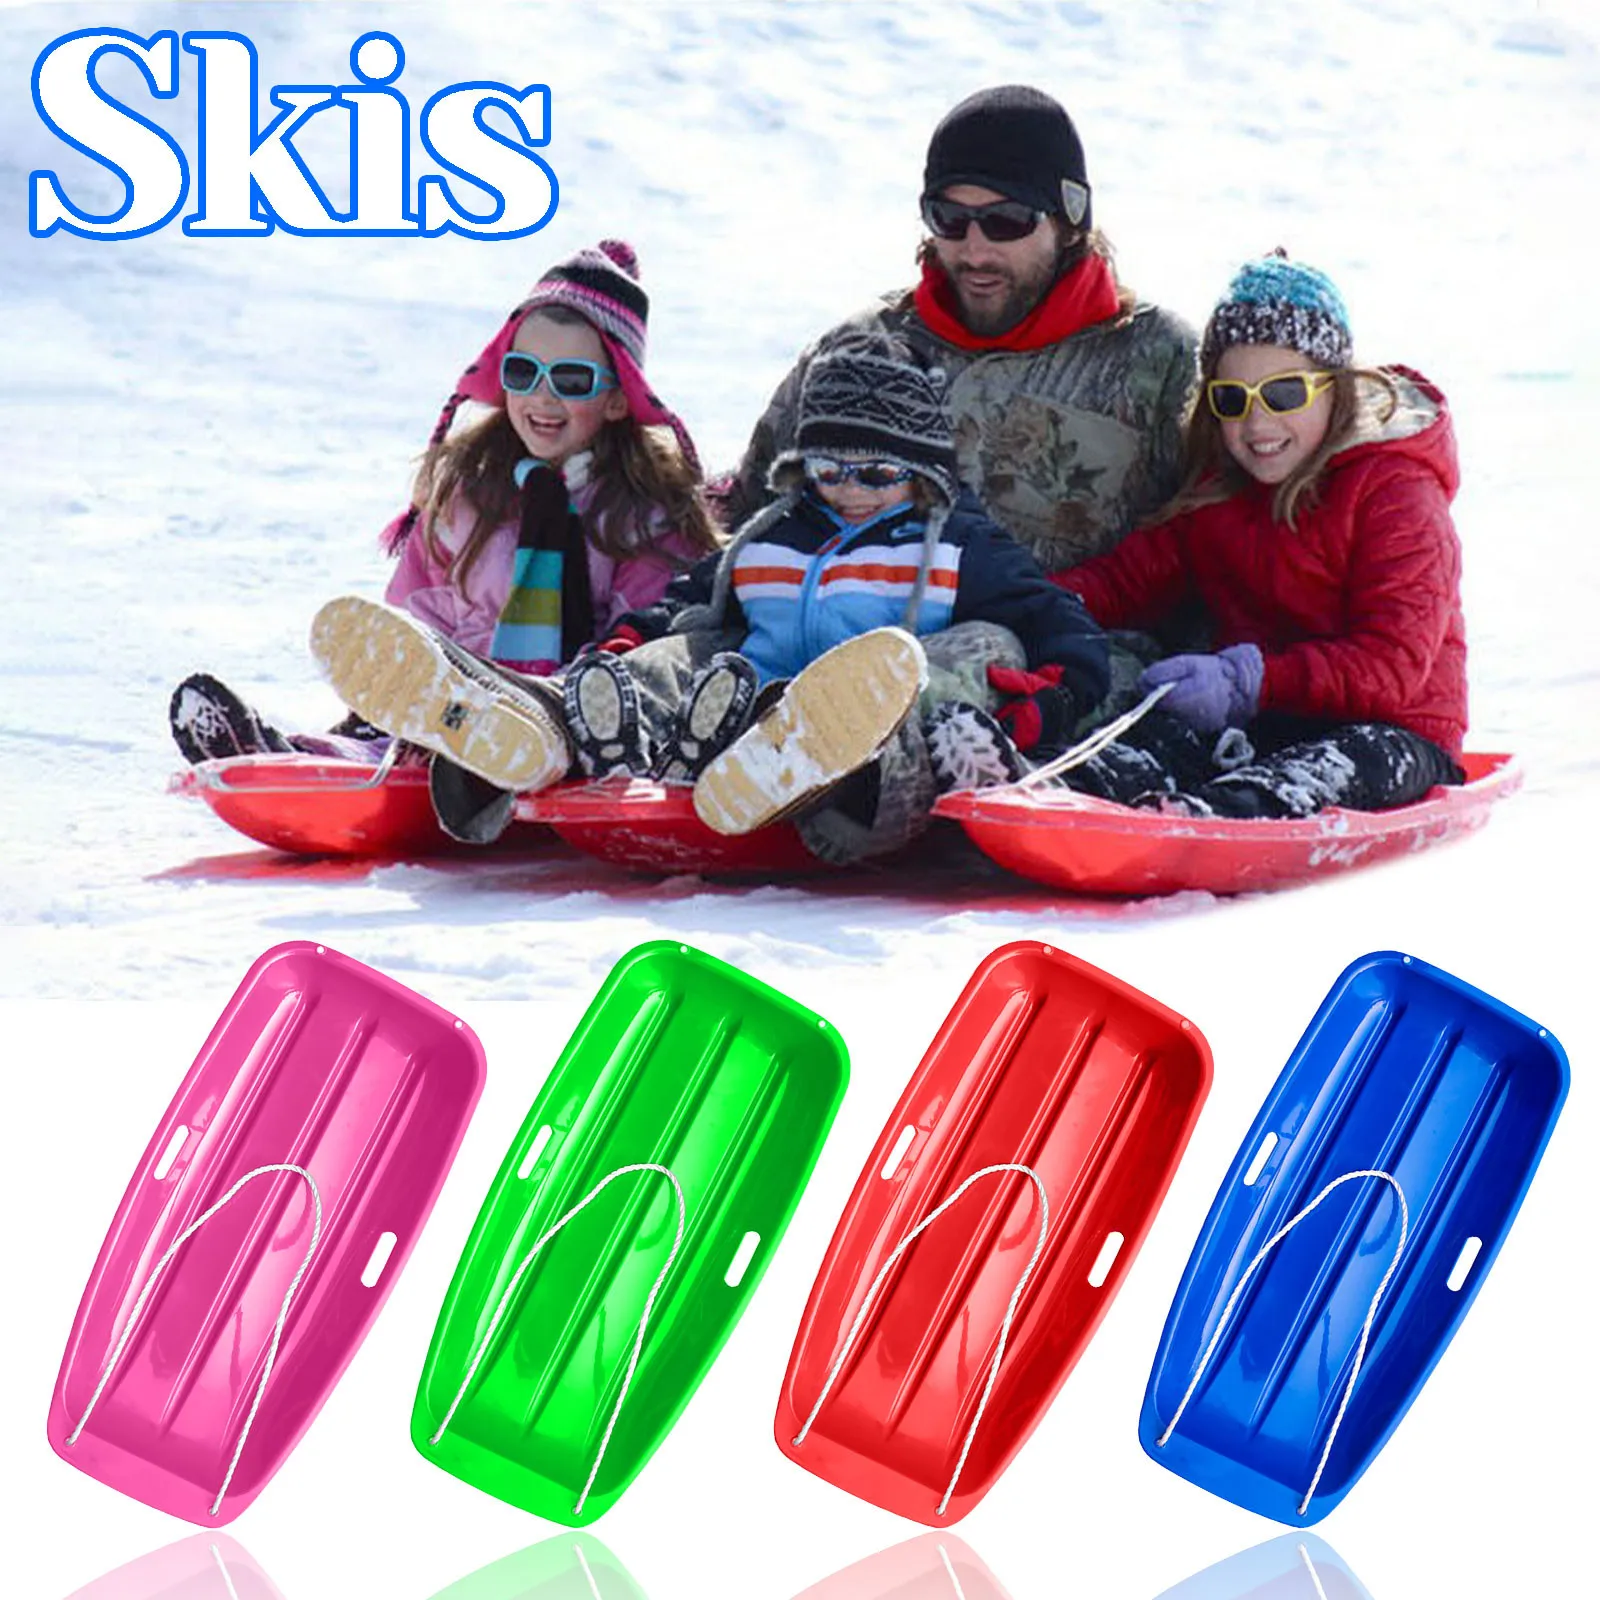 Snow Sled Board Downhill Sled Winter Outdoor,Plastic Cold Resistant Skiing Boards Snow Grass Sand Board Ski Pad for Kids & Adult